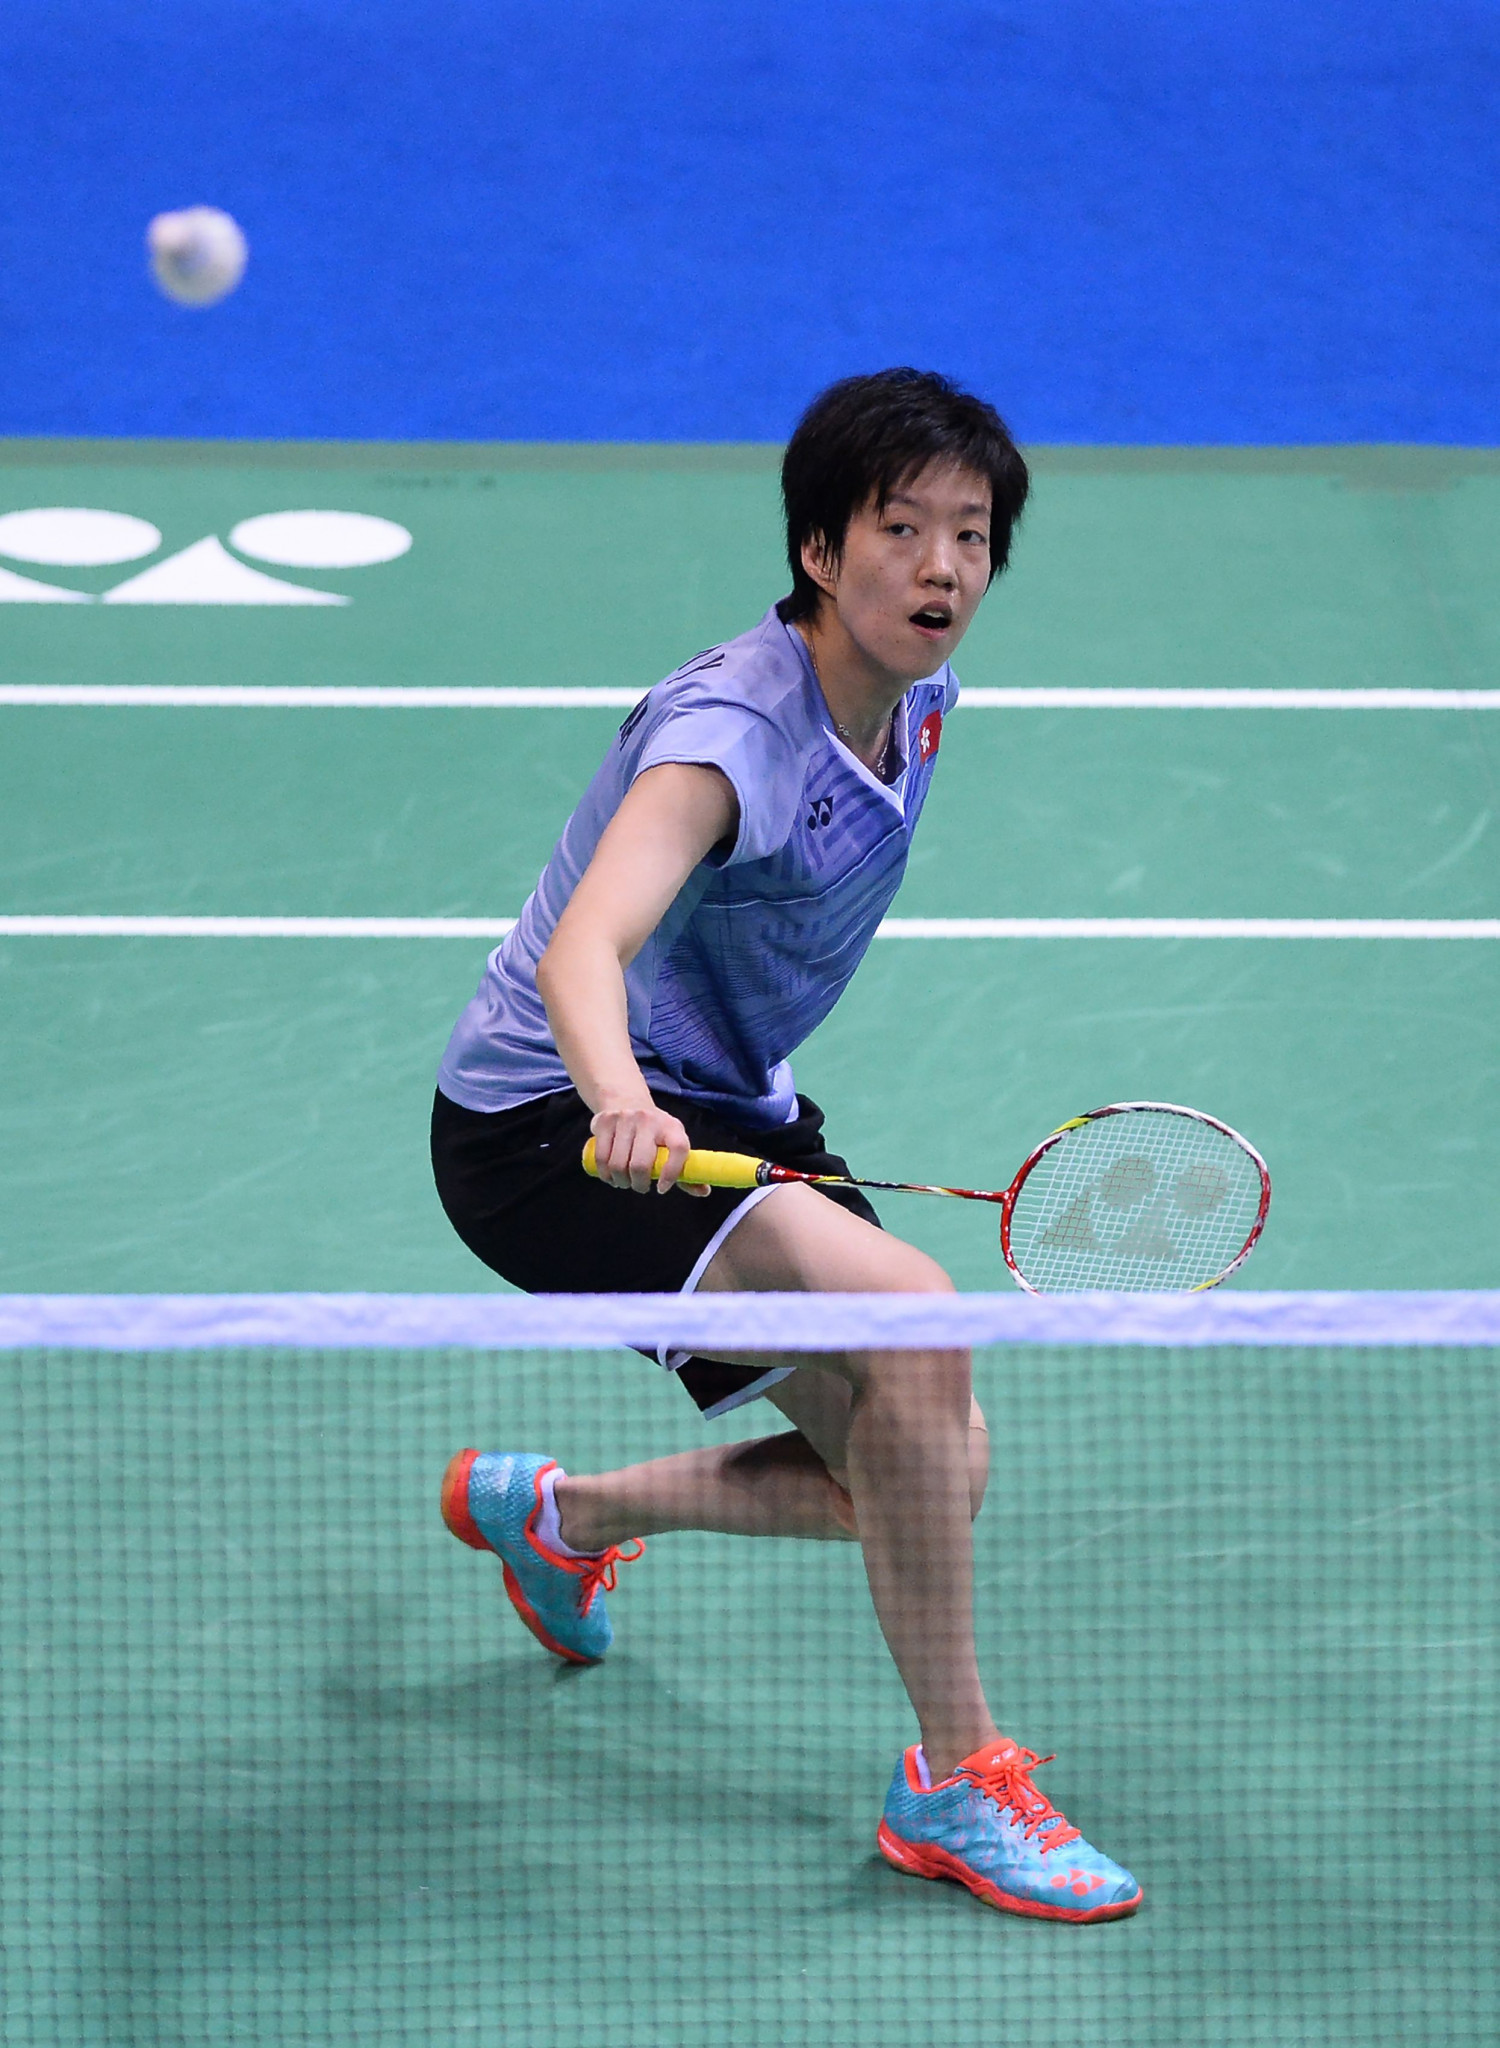 Hong Kong's Cheung Ngan Yi remains on course for success in the women's singles event ©Getty Images